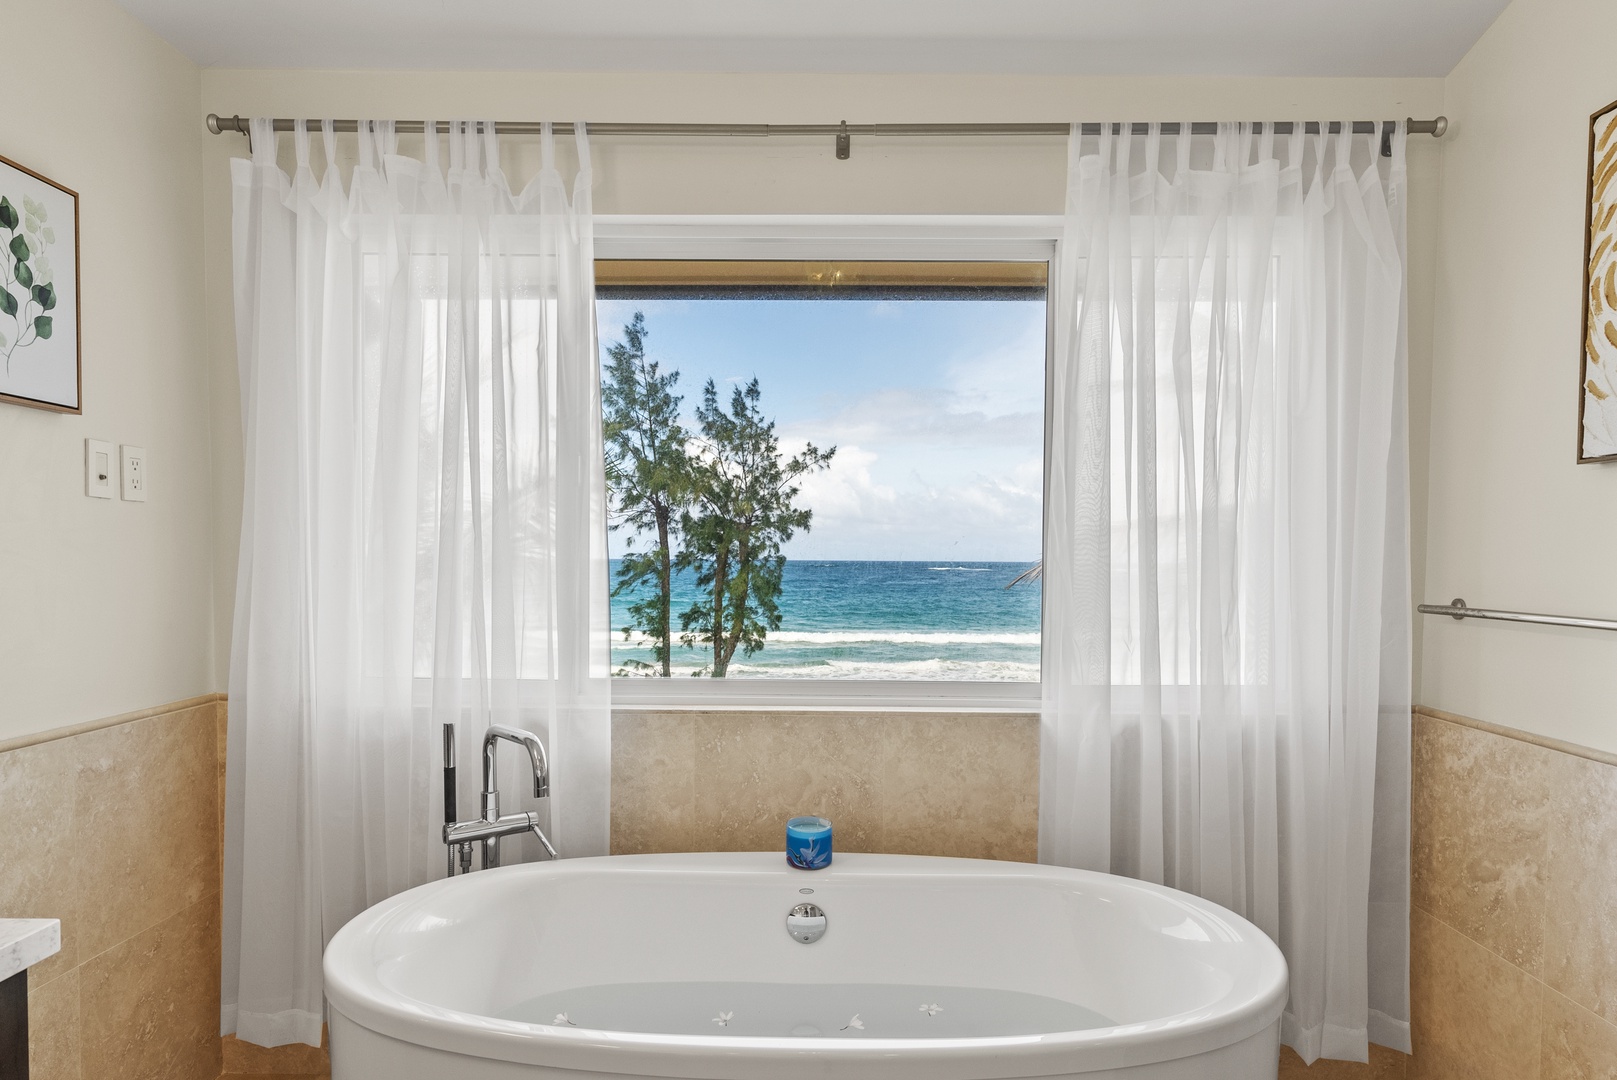 Laie Vacation Rentals, Laie Beachfront Estate - Soak in the tub while enjoying the stunning ocean view through the large window.